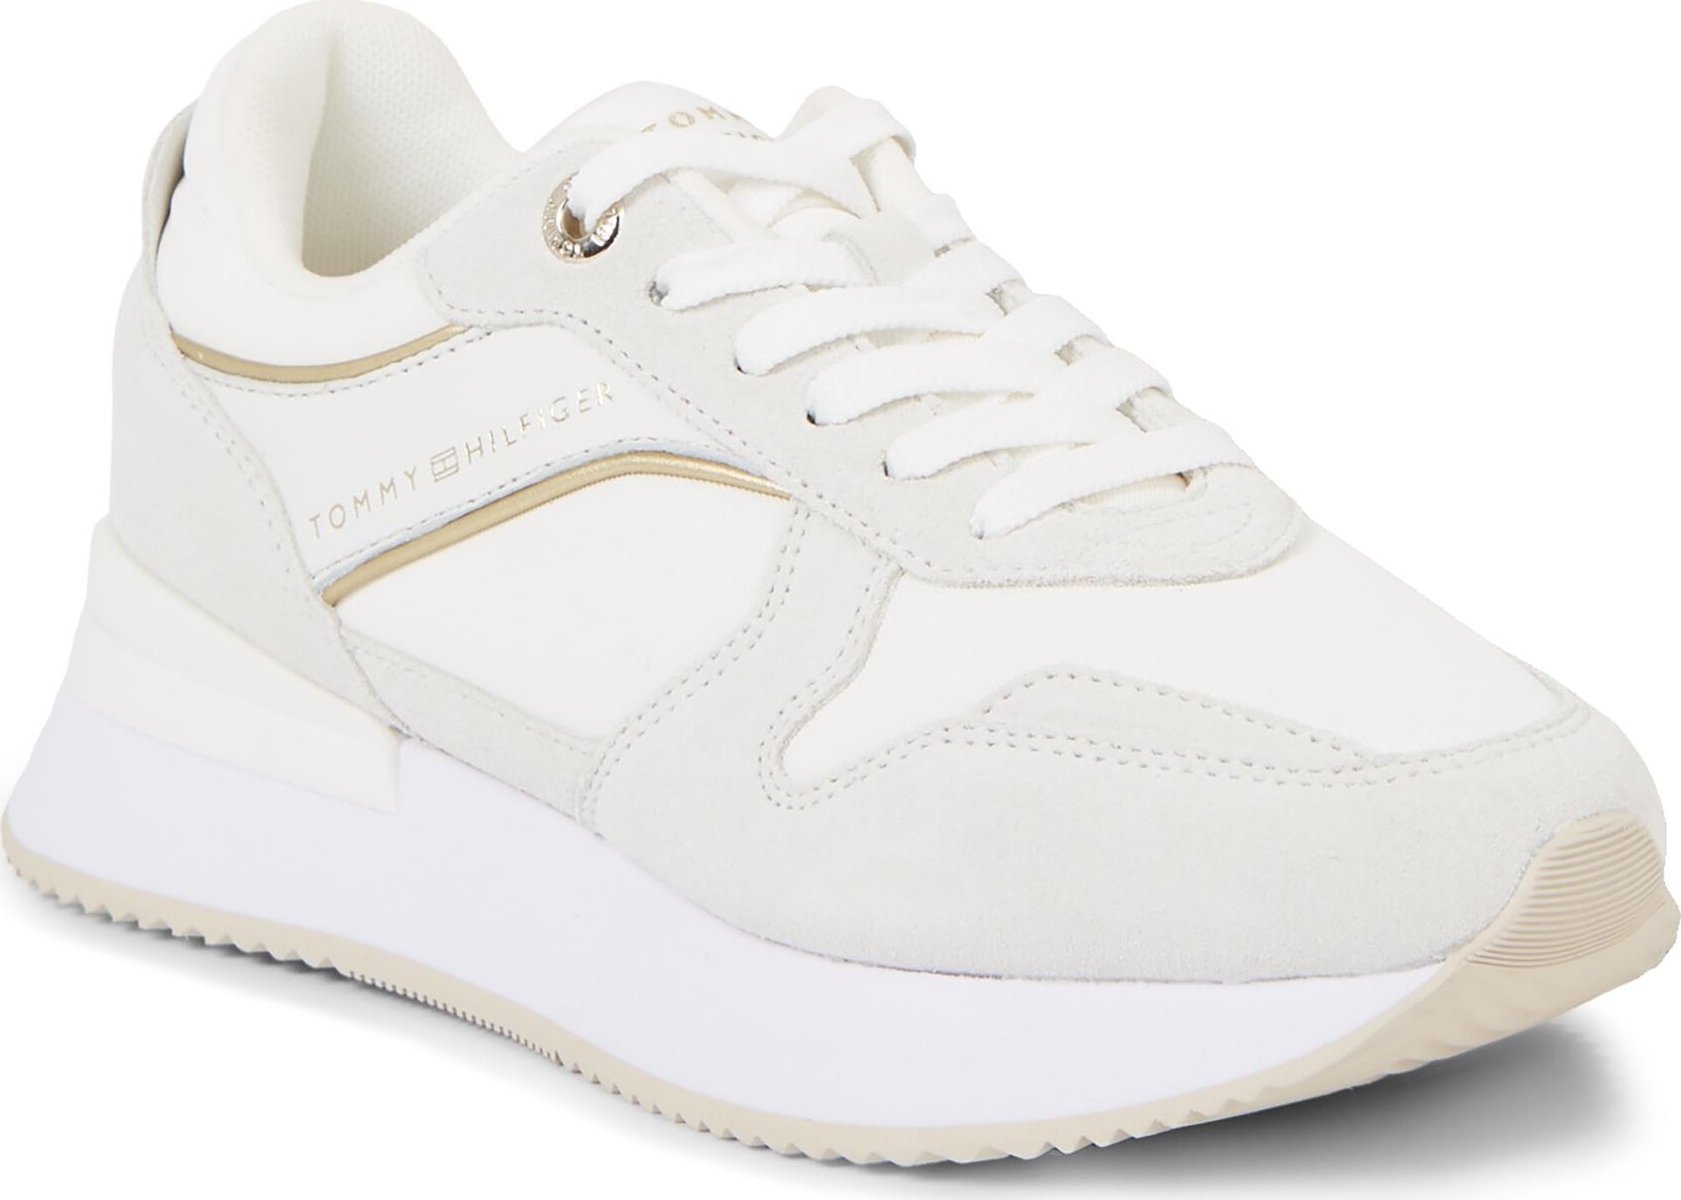 Sneakersy Tommy Hilfiger Elevated Feminine Runner FW0FW07594 Ancient White YBH